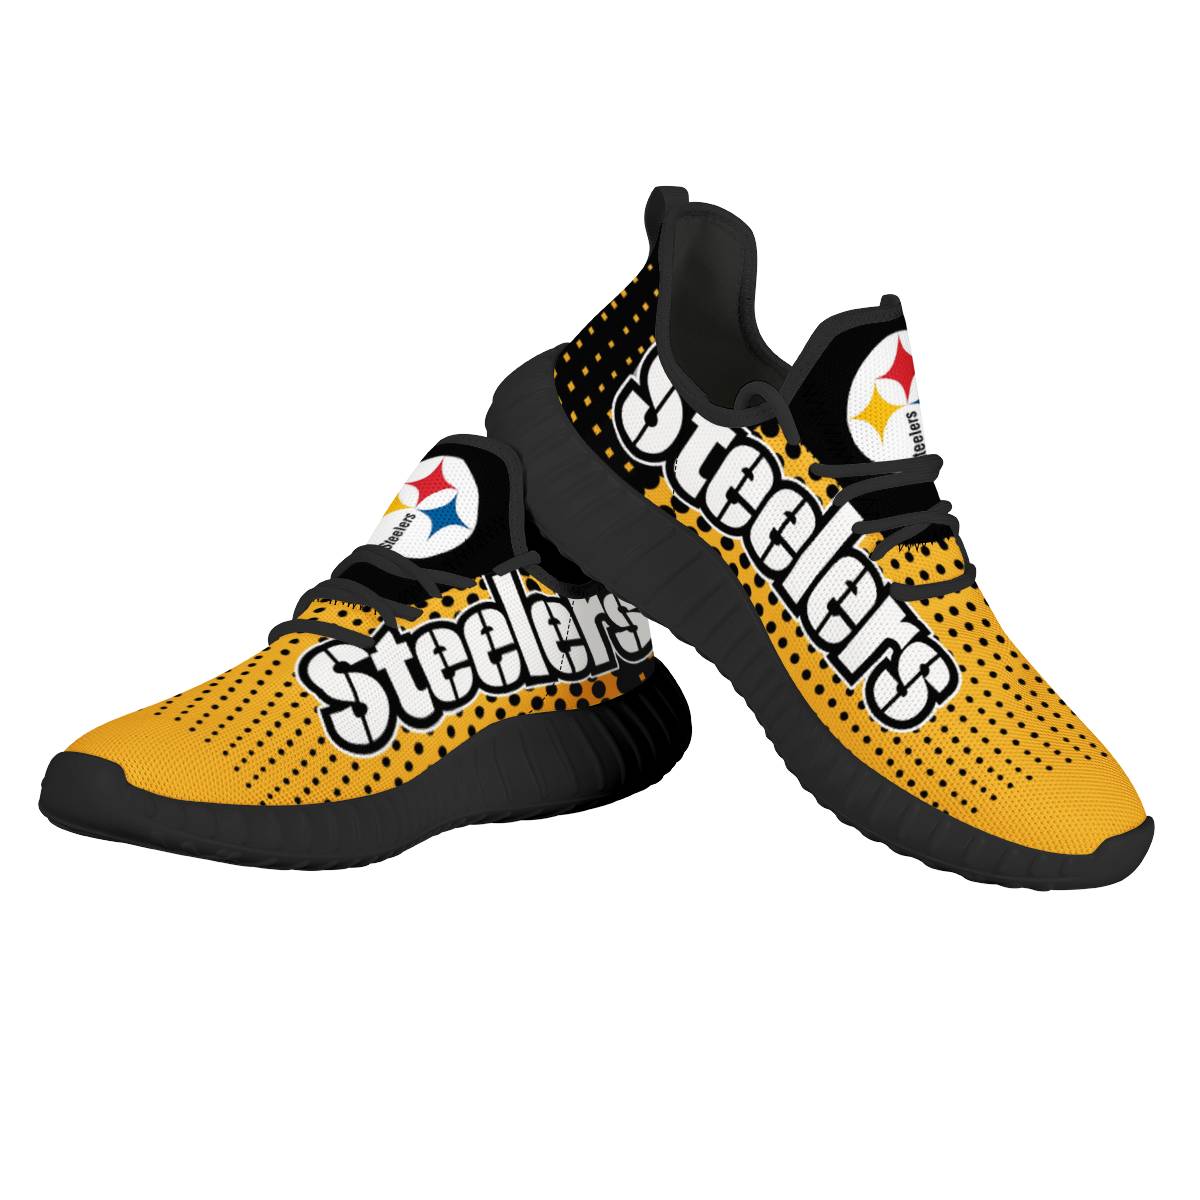 Men's NFL Pittsburgh Steelers Mesh Knit Sneakers/Shoes 001